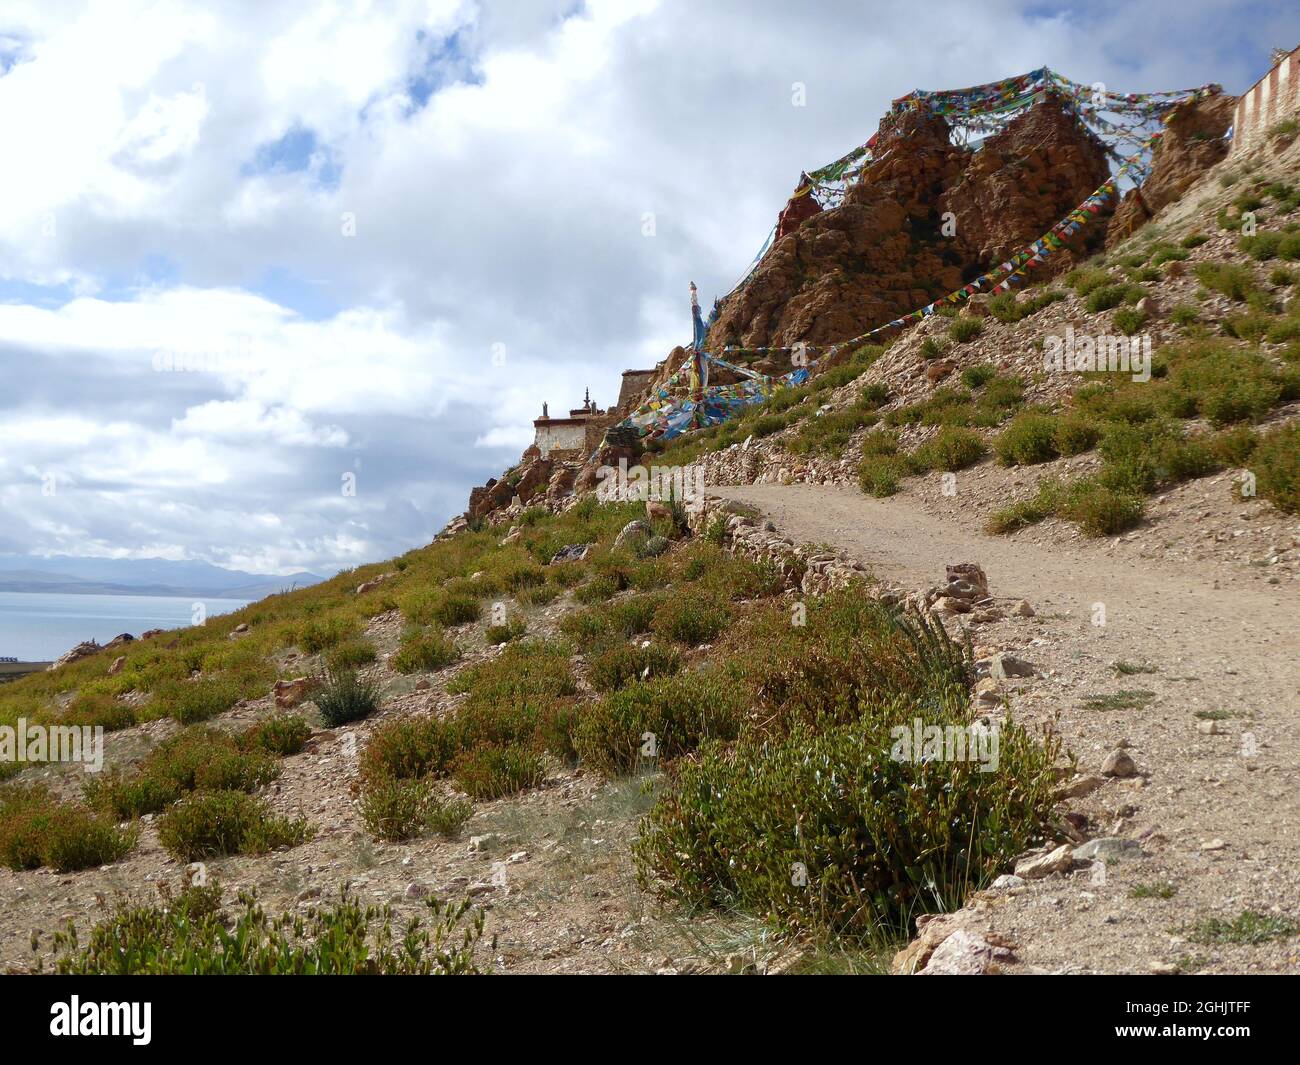 Dirt track leading to Chiu Gompa, a small Tibetan monastery built into the cliffs of a steep red-colored hill on the shores of Lake Manasarovar, Tibet Stock Photo